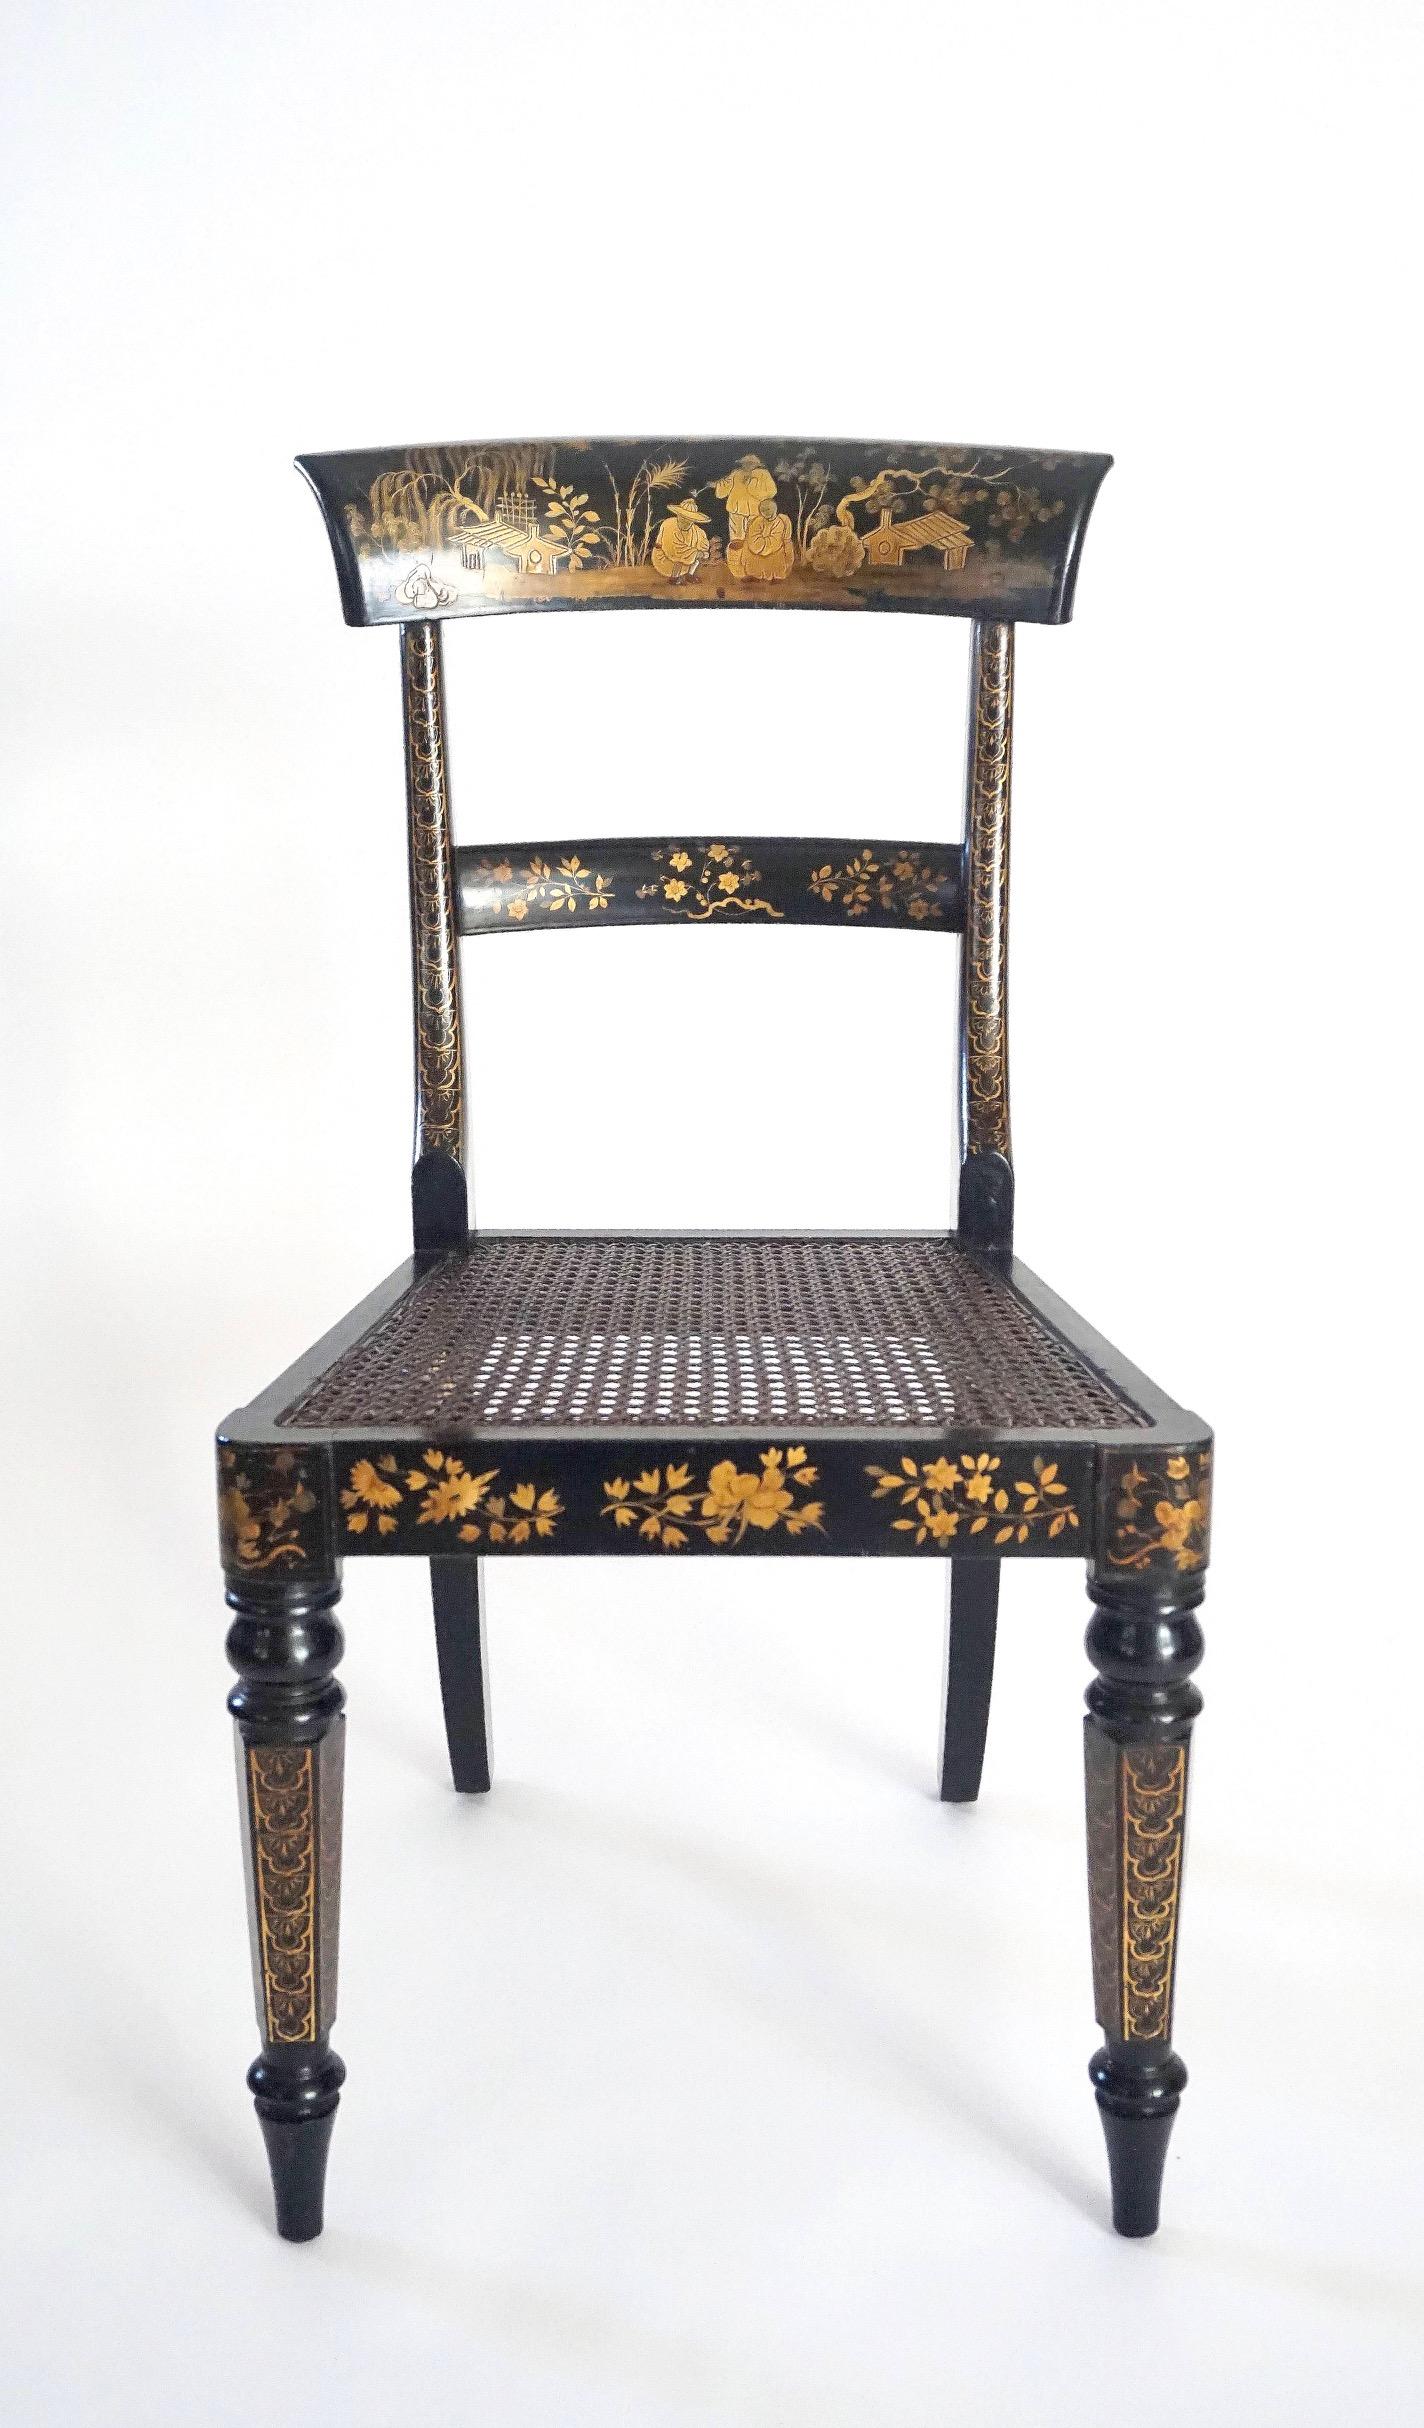 English Chinoiserie Chairs, Ex-Garvan Collection Yale University, circa 1835 In Good Condition For Sale In Kinderhook, NY